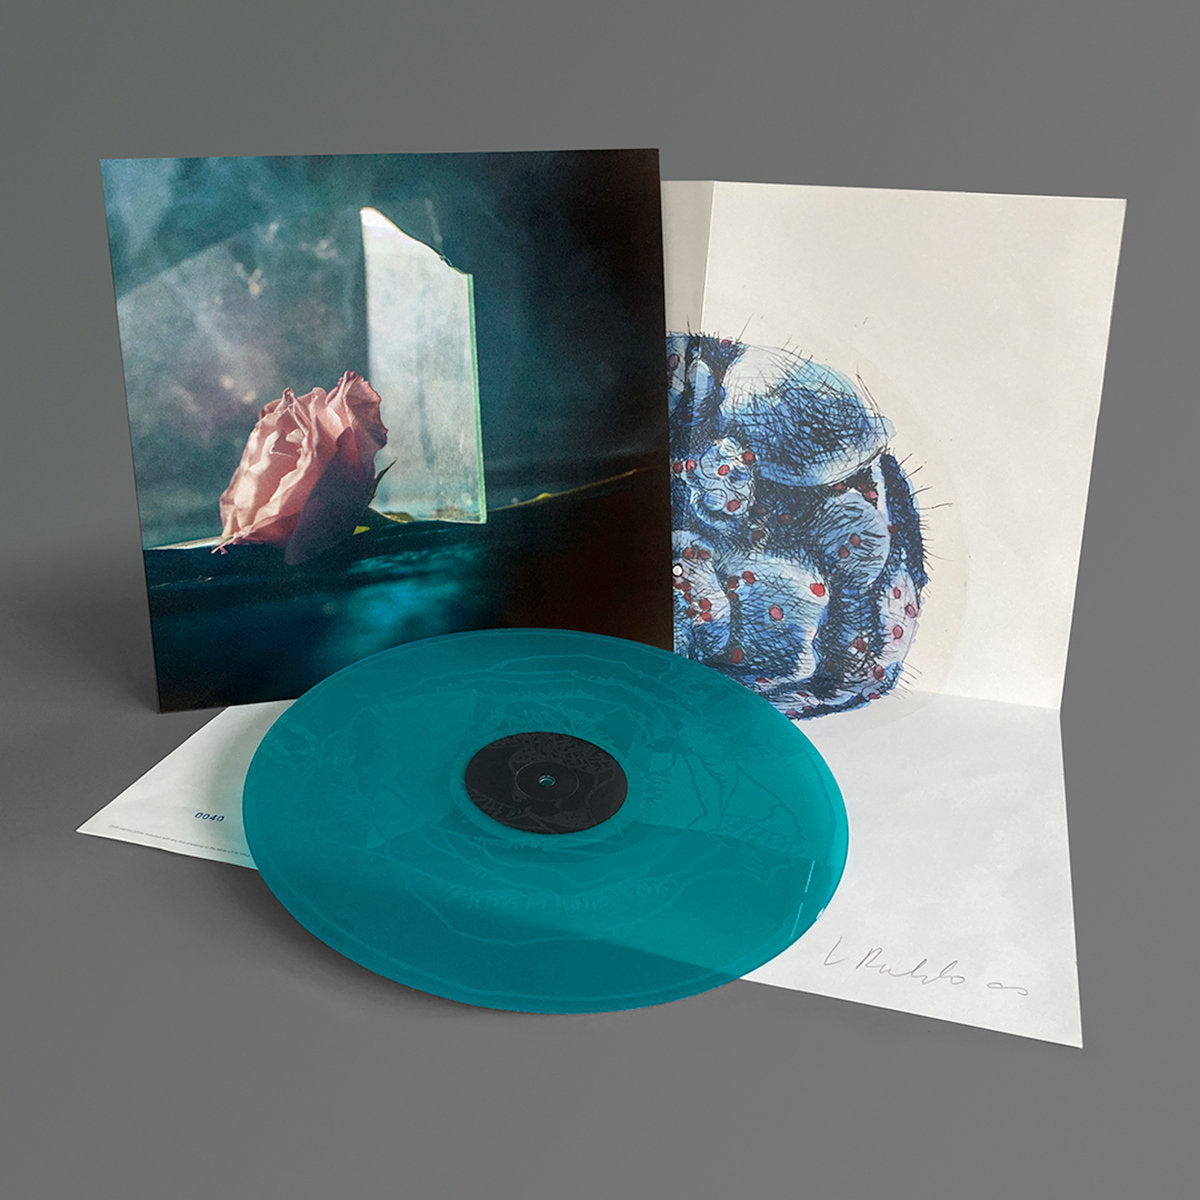 Lee Ranaldo - In Virus Times EP (Limited Edition on Turquoise Etched Vinyl + Signed Print)